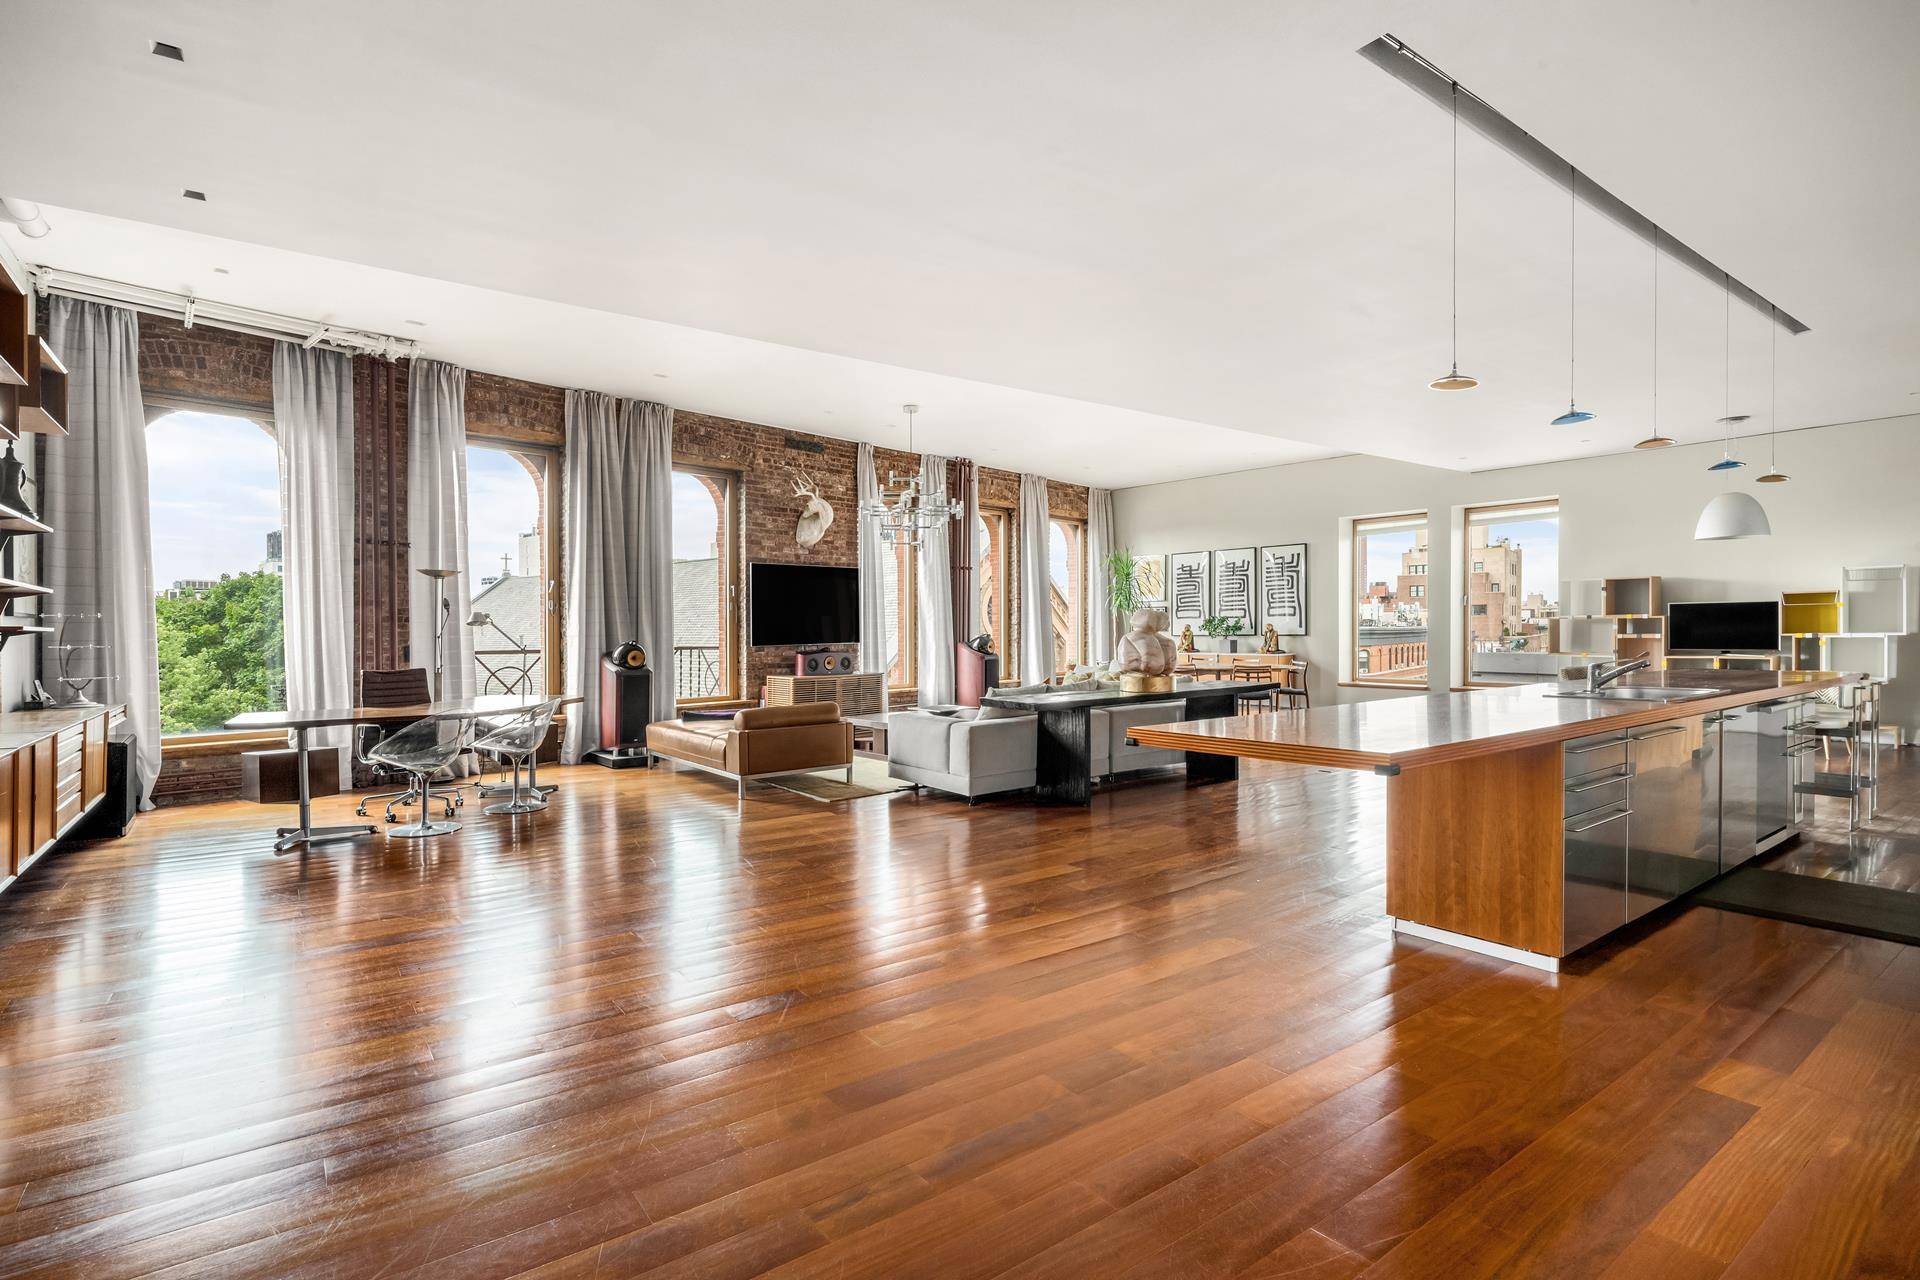 Turnkey opportunity for an authentic 3BR furnished Soho loft in the highly prized 285 Lafayette.